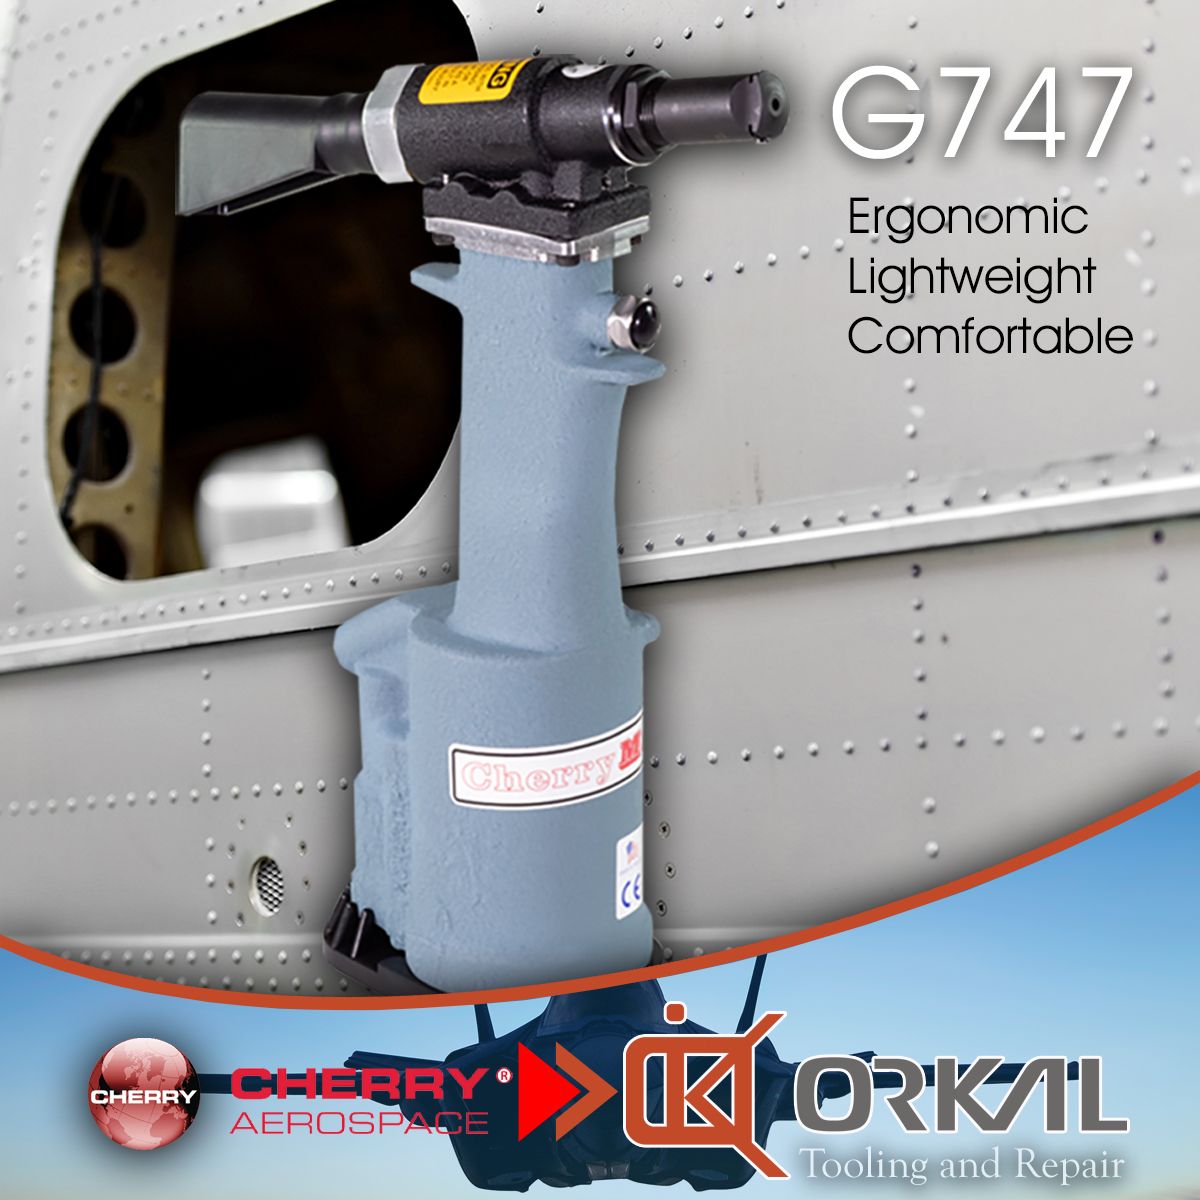 orkal, cherry aerospace g747: ergonomic, lightweight pneumatic tool. ideal for aircraft fittings. endorsed by cherry aerospace, orkal industries & auto draft.